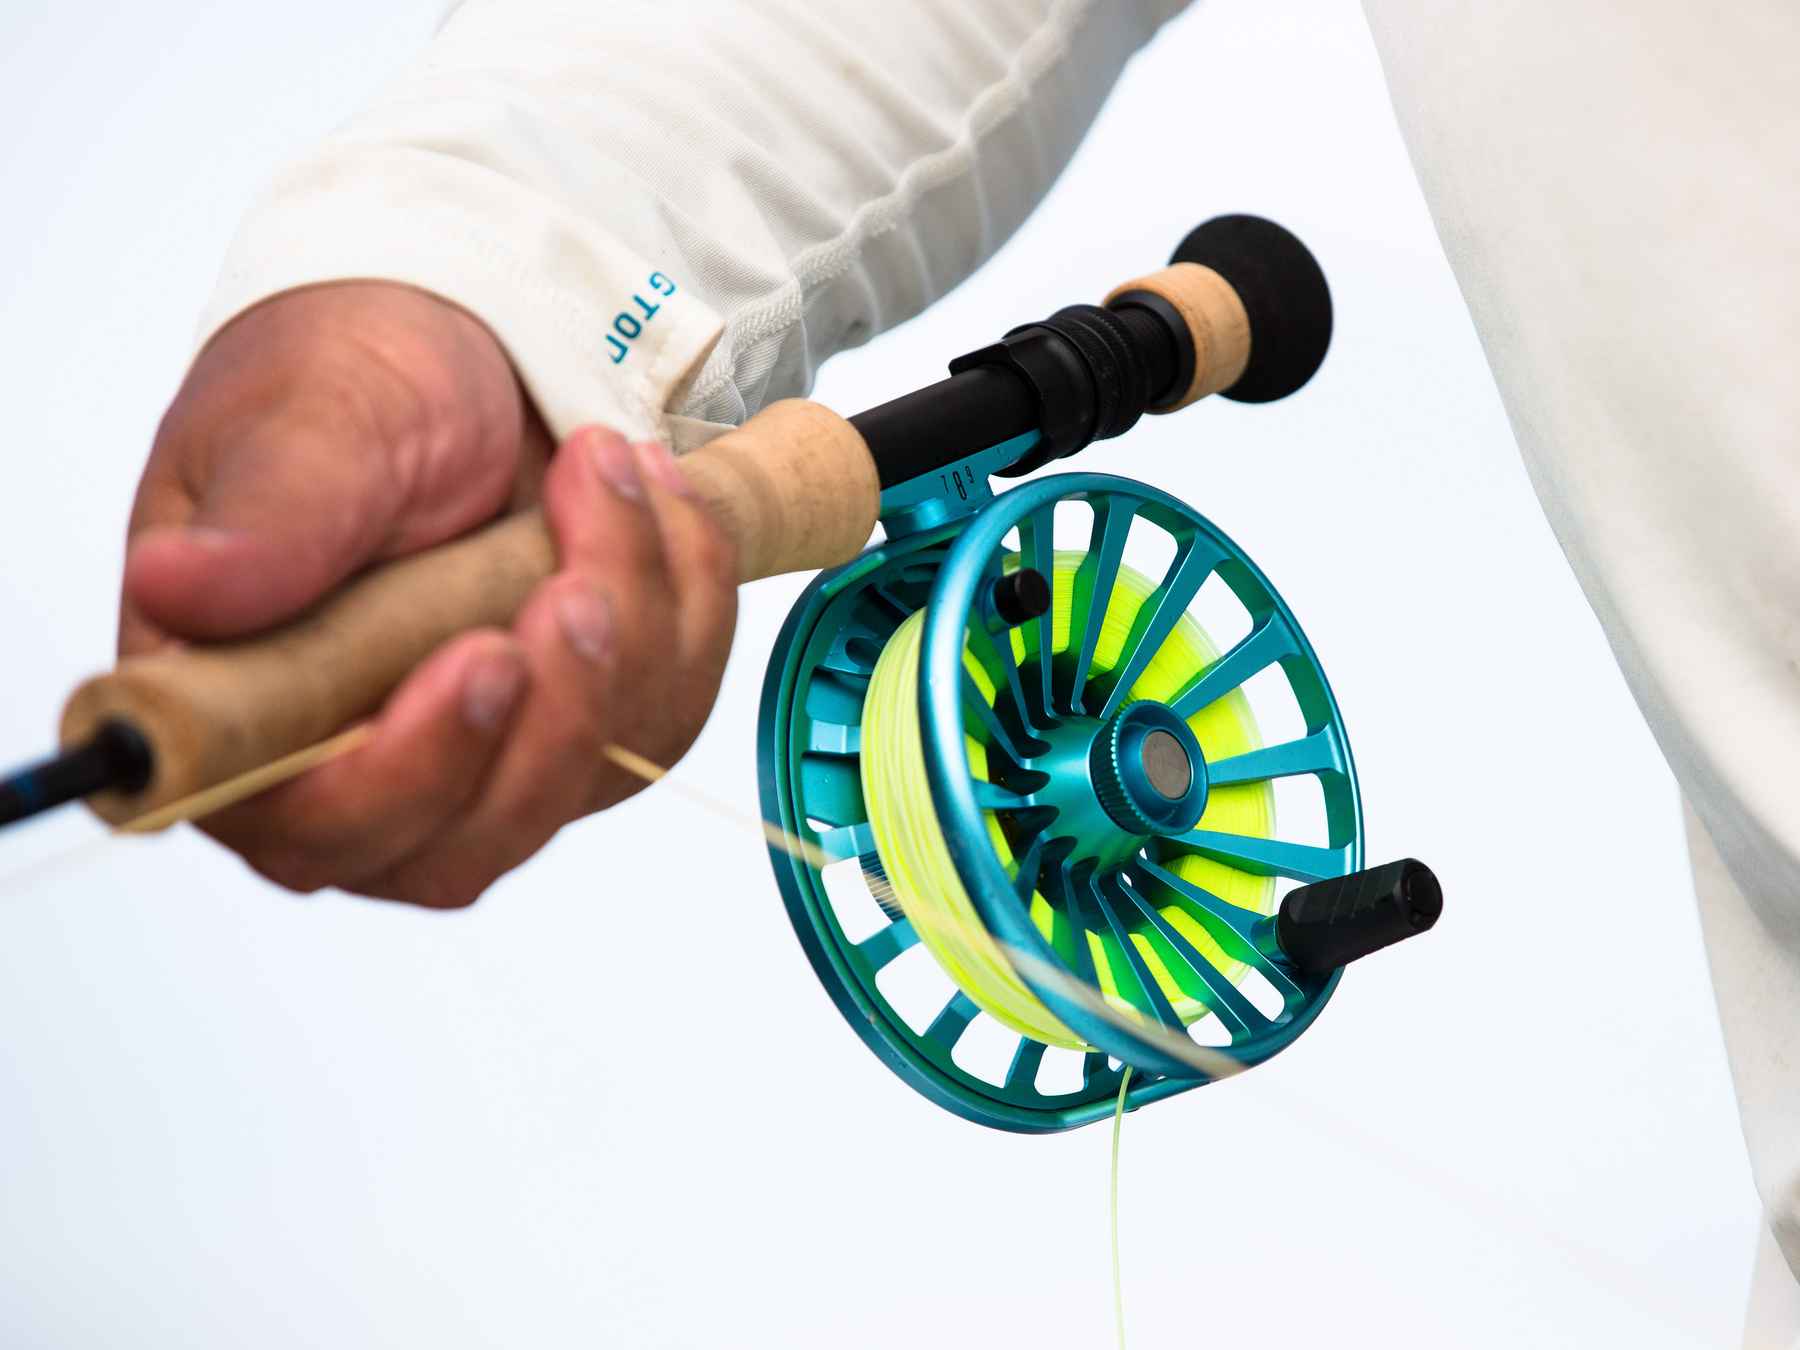 Redington aims to shake up reels, again, with its new GRANDE